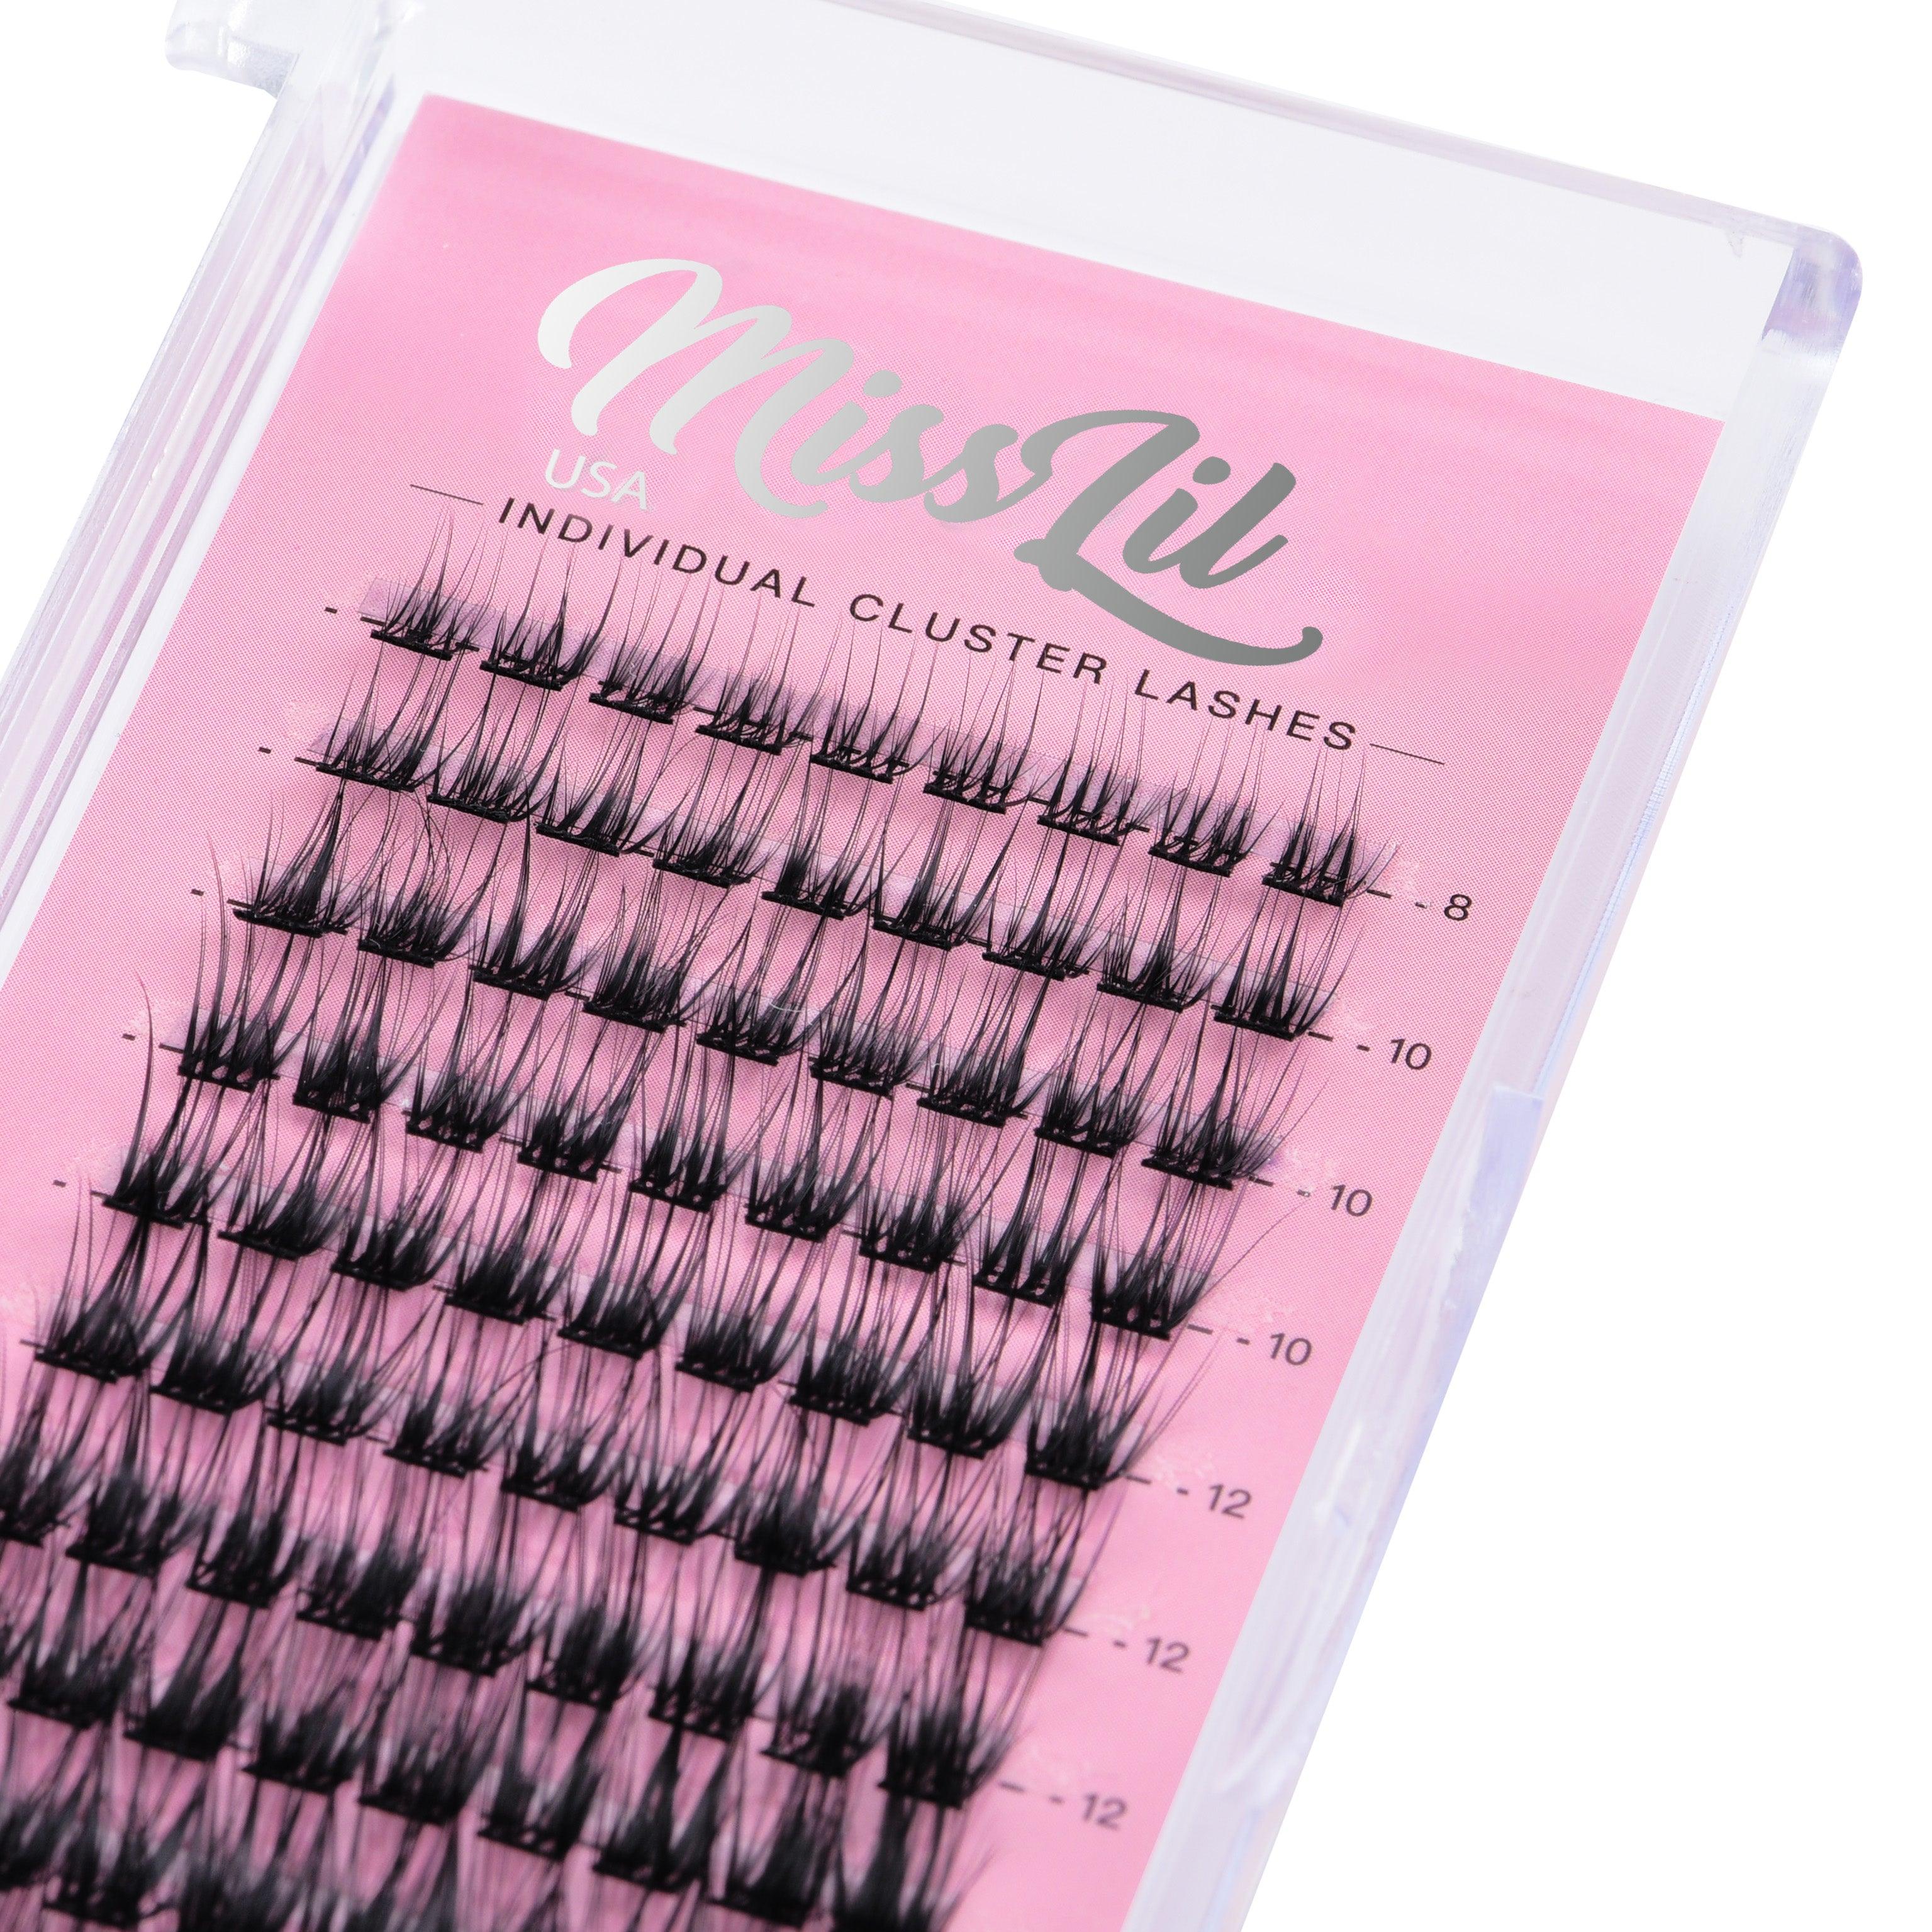 Individual Cluster Lashes AD-07 Small MIX Tray - Miss Lil USA